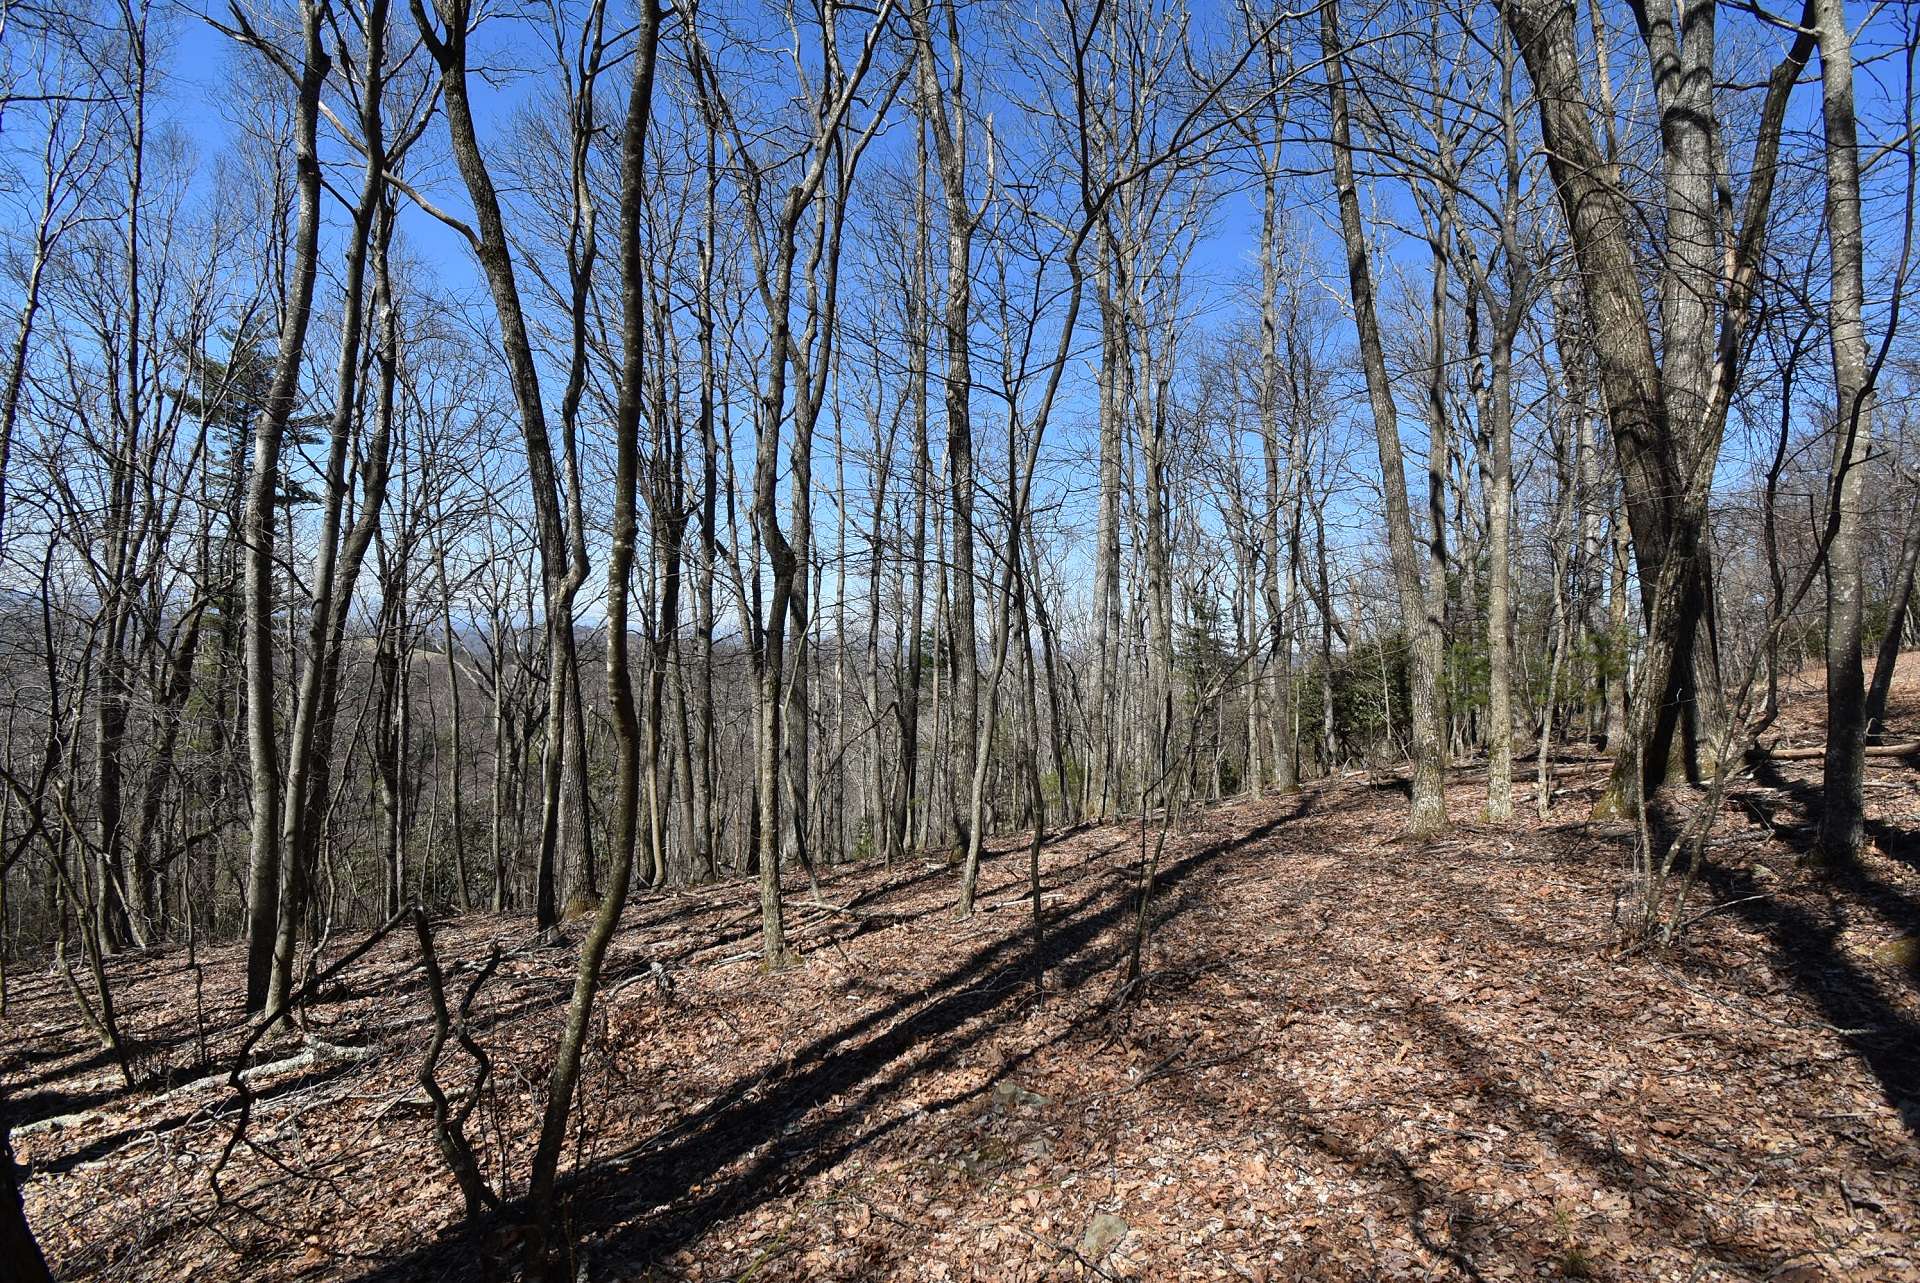 Offered at only $49,900, this beautifully wooded 4.81 acre building site is a great location for your dream NC Mountain cabin or home. The terrain varies from rolling to sloping and offers a diverse mixture of native hardwoods, evergreens, and mountain foliage. Call today for additional information on listing H288.